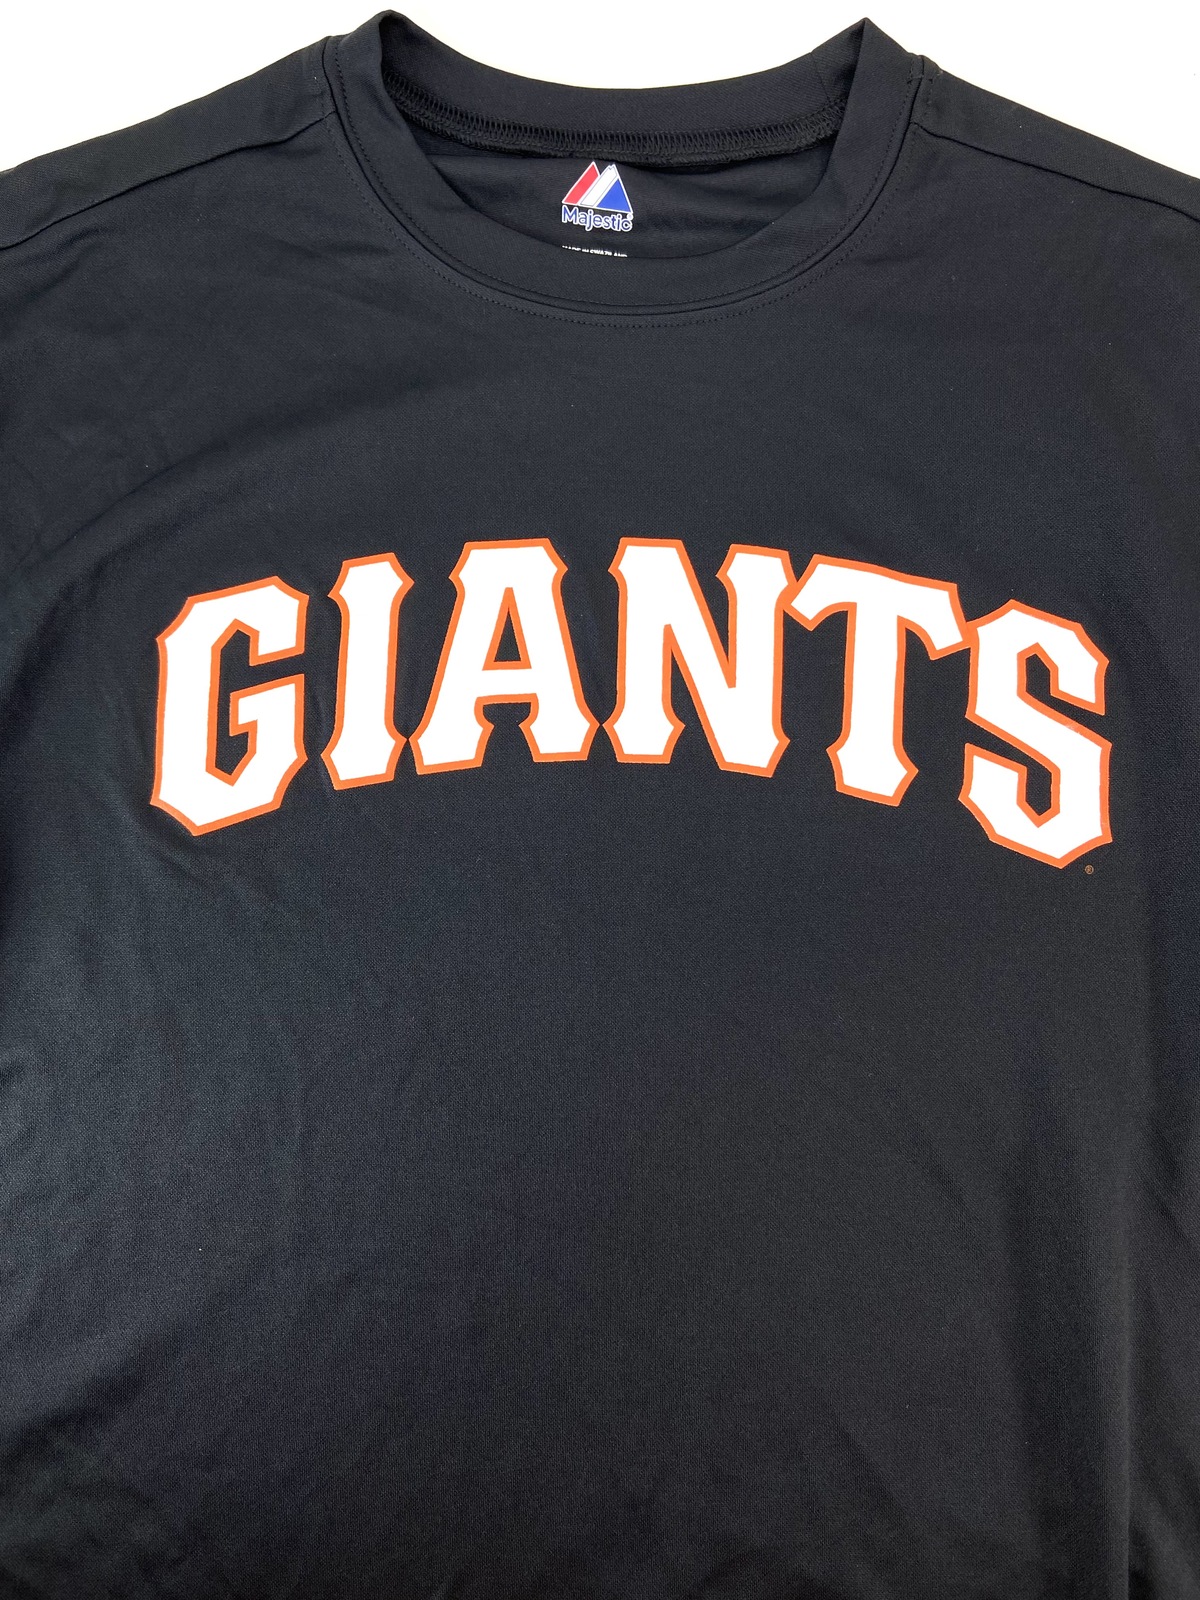 Primary image for San Francisco Giants 2012 MLB Adult XL Cool Base Tee By Majestic 